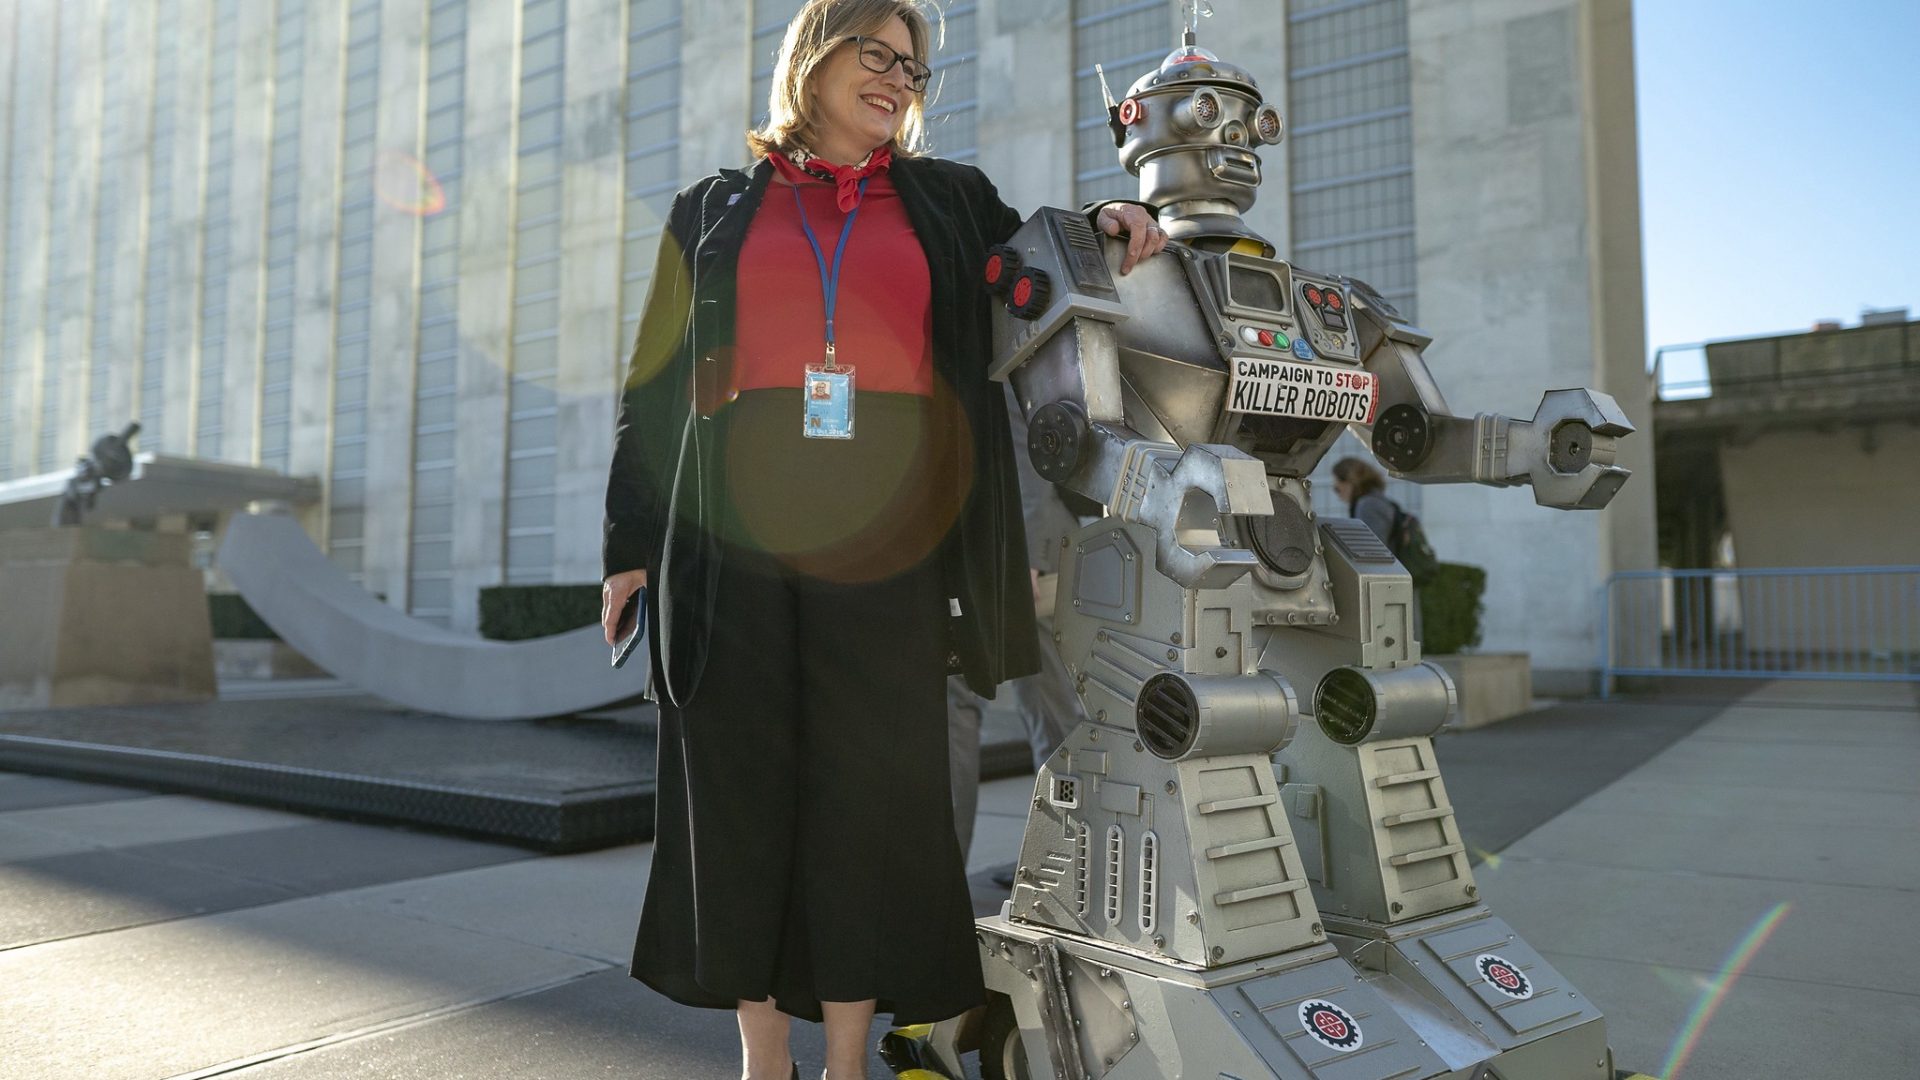 Mary Wareham poses with her hand on the Campaign robot’s shoulder in front of the UN building with the sun behind them.